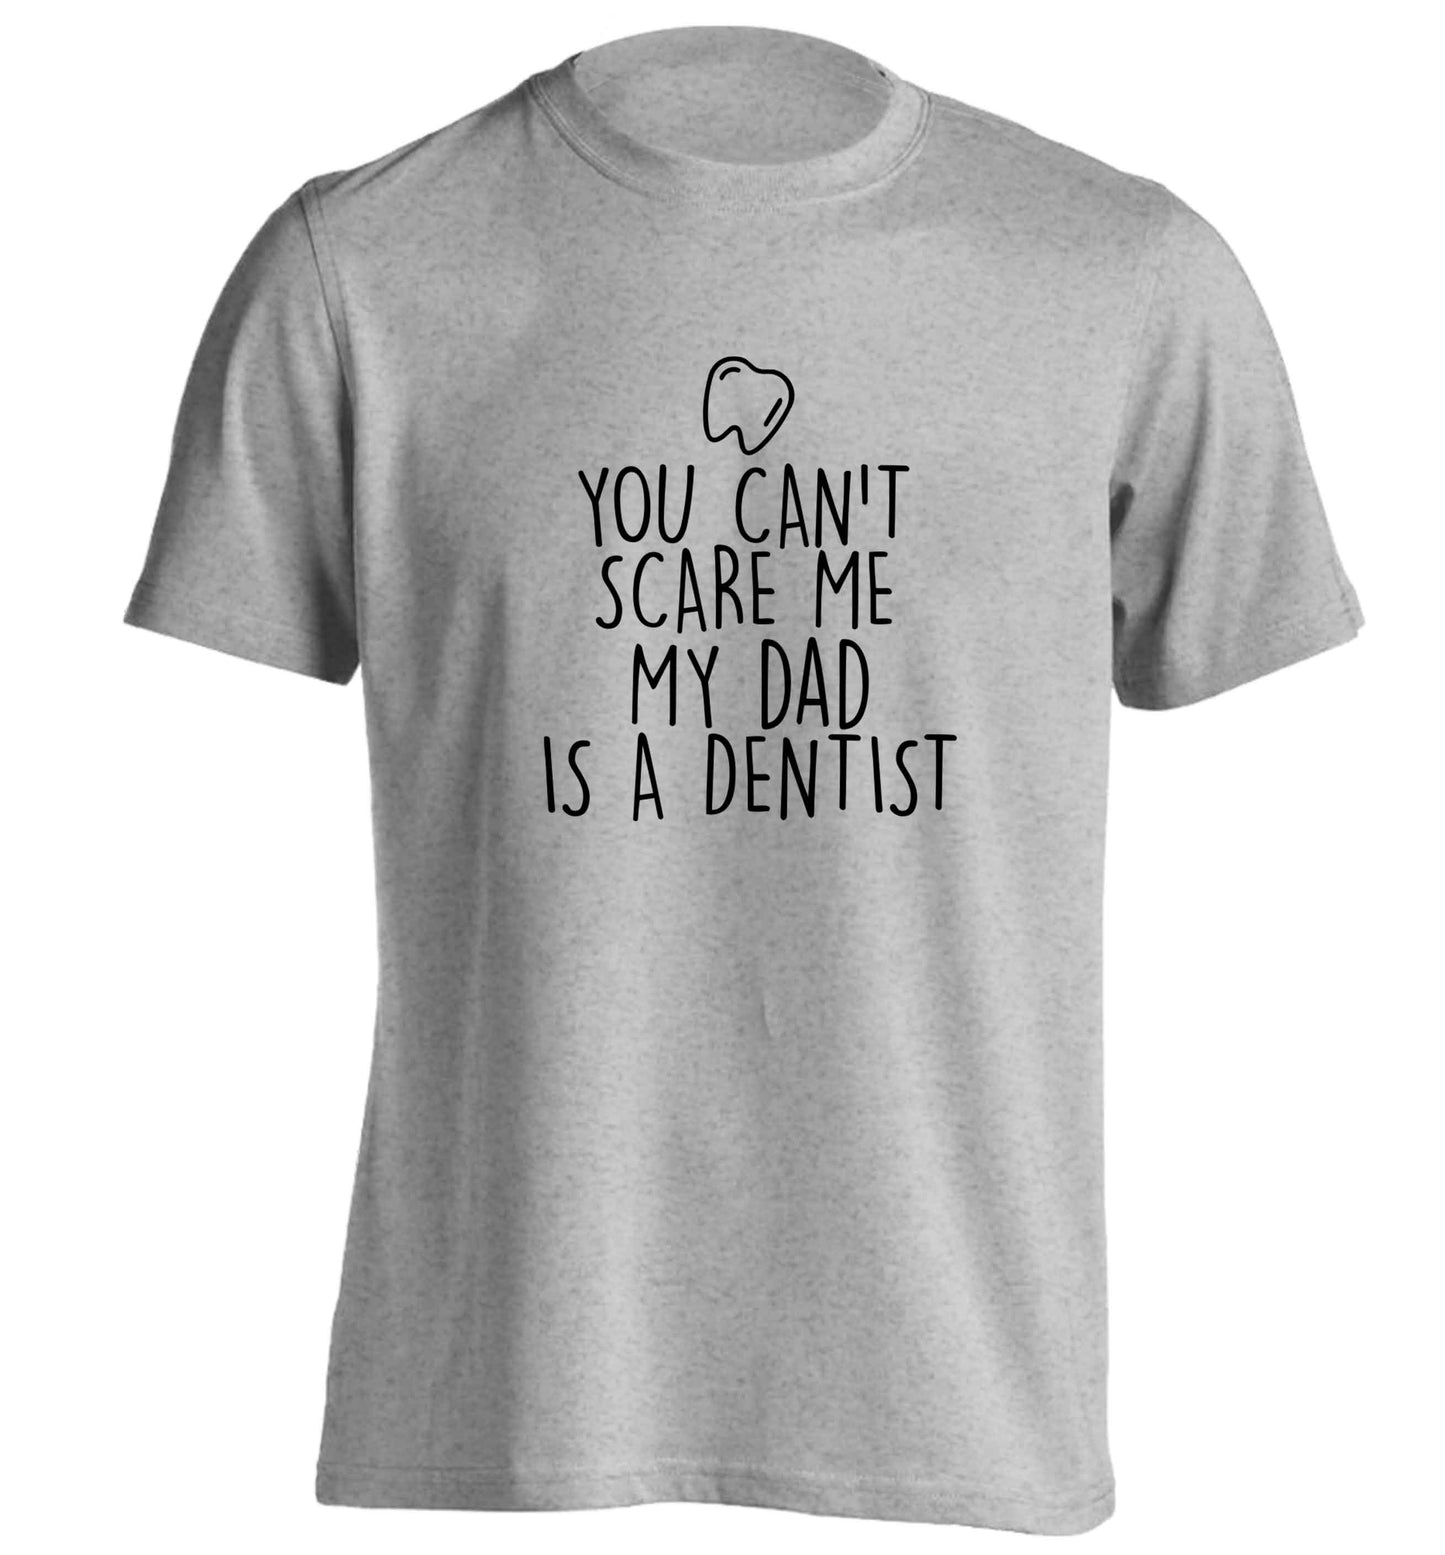 You can't scare me my dad is a dentist adults unisex grey Tshirt 2XL